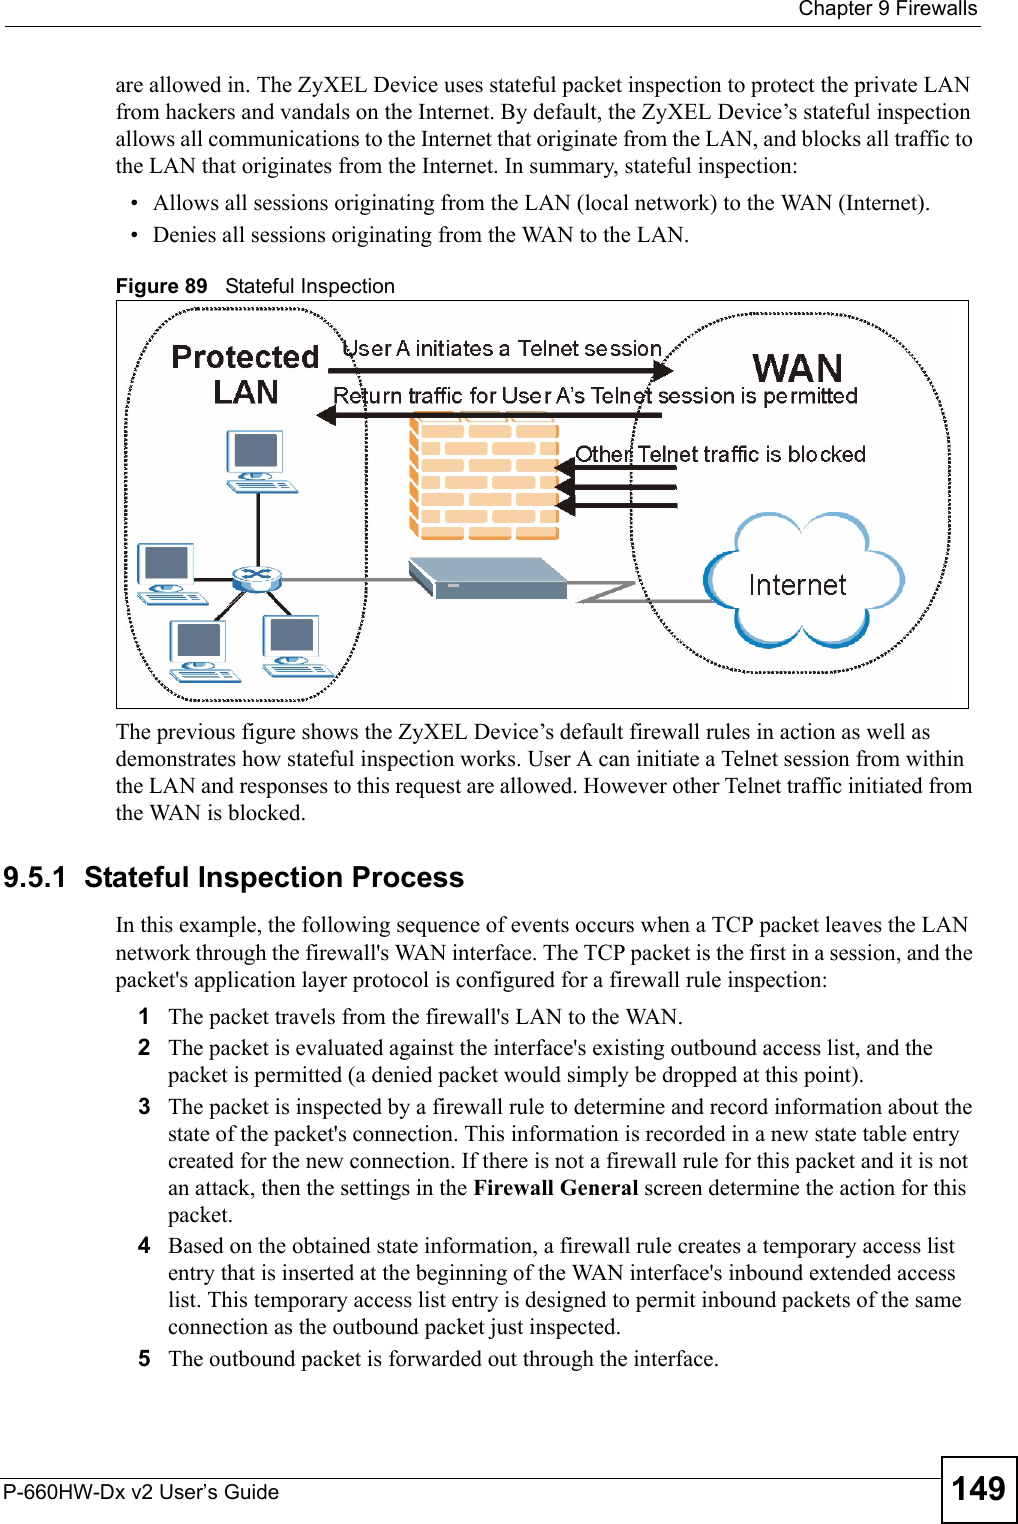  Chapter 9 FirewallsP-660HW-Dx v2 User’s Guide 149are allowed in. The ZyXEL Device uses stateful packet inspection to protect the private LAN from hackers and vandals on the Internet. By default, the ZyXEL Device’s stateful inspection allows all communications to the Internet that originate from the LAN, and blocks all traffic to the LAN that originates from the Internet. In summary, stateful inspection: • Allows all sessions originating from the LAN (local network) to the WAN (Internet).• Denies all sessions originating from the WAN to the LAN.Figure 89   Stateful InspectionThe previous figure shows the ZyXEL Device’s default firewall rules in action as well as demonstrates how stateful inspection works. User A can initiate a Telnet session from within the LAN and responses to this request are allowed. However other Telnet traffic initiated from the WAN is blocked.9.5.1  Stateful Inspection ProcessIn this example, the following sequence of events occurs when a TCP packet leaves the LAN network through the firewall&apos;s WAN interface. The TCP packet is the first in a session, and the packet&apos;s application layer protocol is configured for a firewall rule inspection:1The packet travels from the firewall&apos;s LAN to the WAN.2The packet is evaluated against the interface&apos;s existing outbound access list, and the packet is permitted (a denied packet would simply be dropped at this point).3The packet is inspected by a firewall rule to determine and record information about the state of the packet&apos;s connection. This information is recorded in a new state table entry created for the new connection. If there is not a firewall rule for this packet and it is not an attack, then the settings in the Firewall General screen determine the action for this packet.4Based on the obtained state information, a firewall rule creates a temporary access list entry that is inserted at the beginning of the WAN interface&apos;s inbound extended access list. This temporary access list entry is designed to permit inbound packets of the same connection as the outbound packet just inspected.5The outbound packet is forwarded out through the interface.